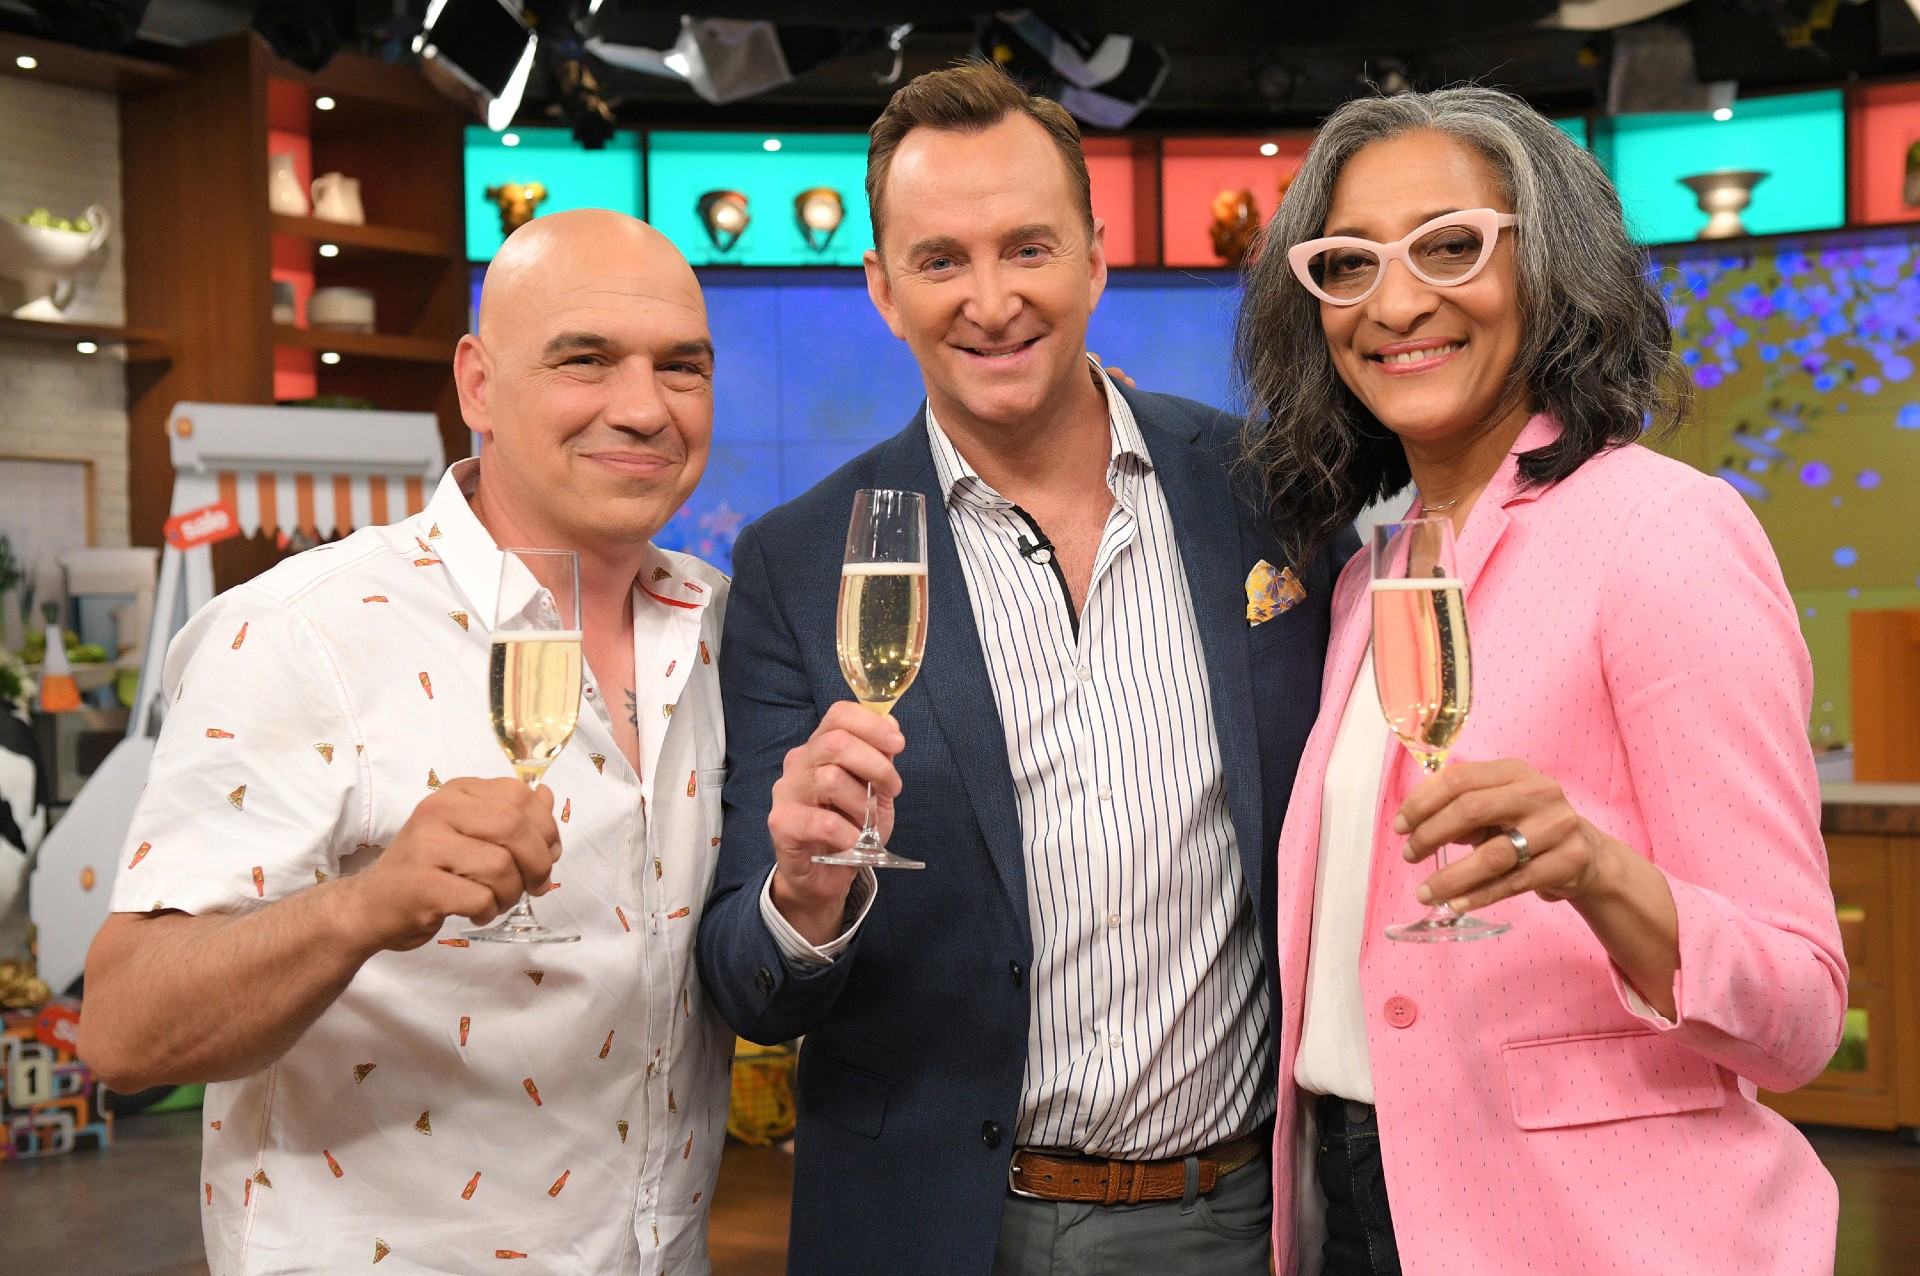 Michael Symon, Clinton Kelly, and Carla Hall raise a glass of wine on the set of The Chew